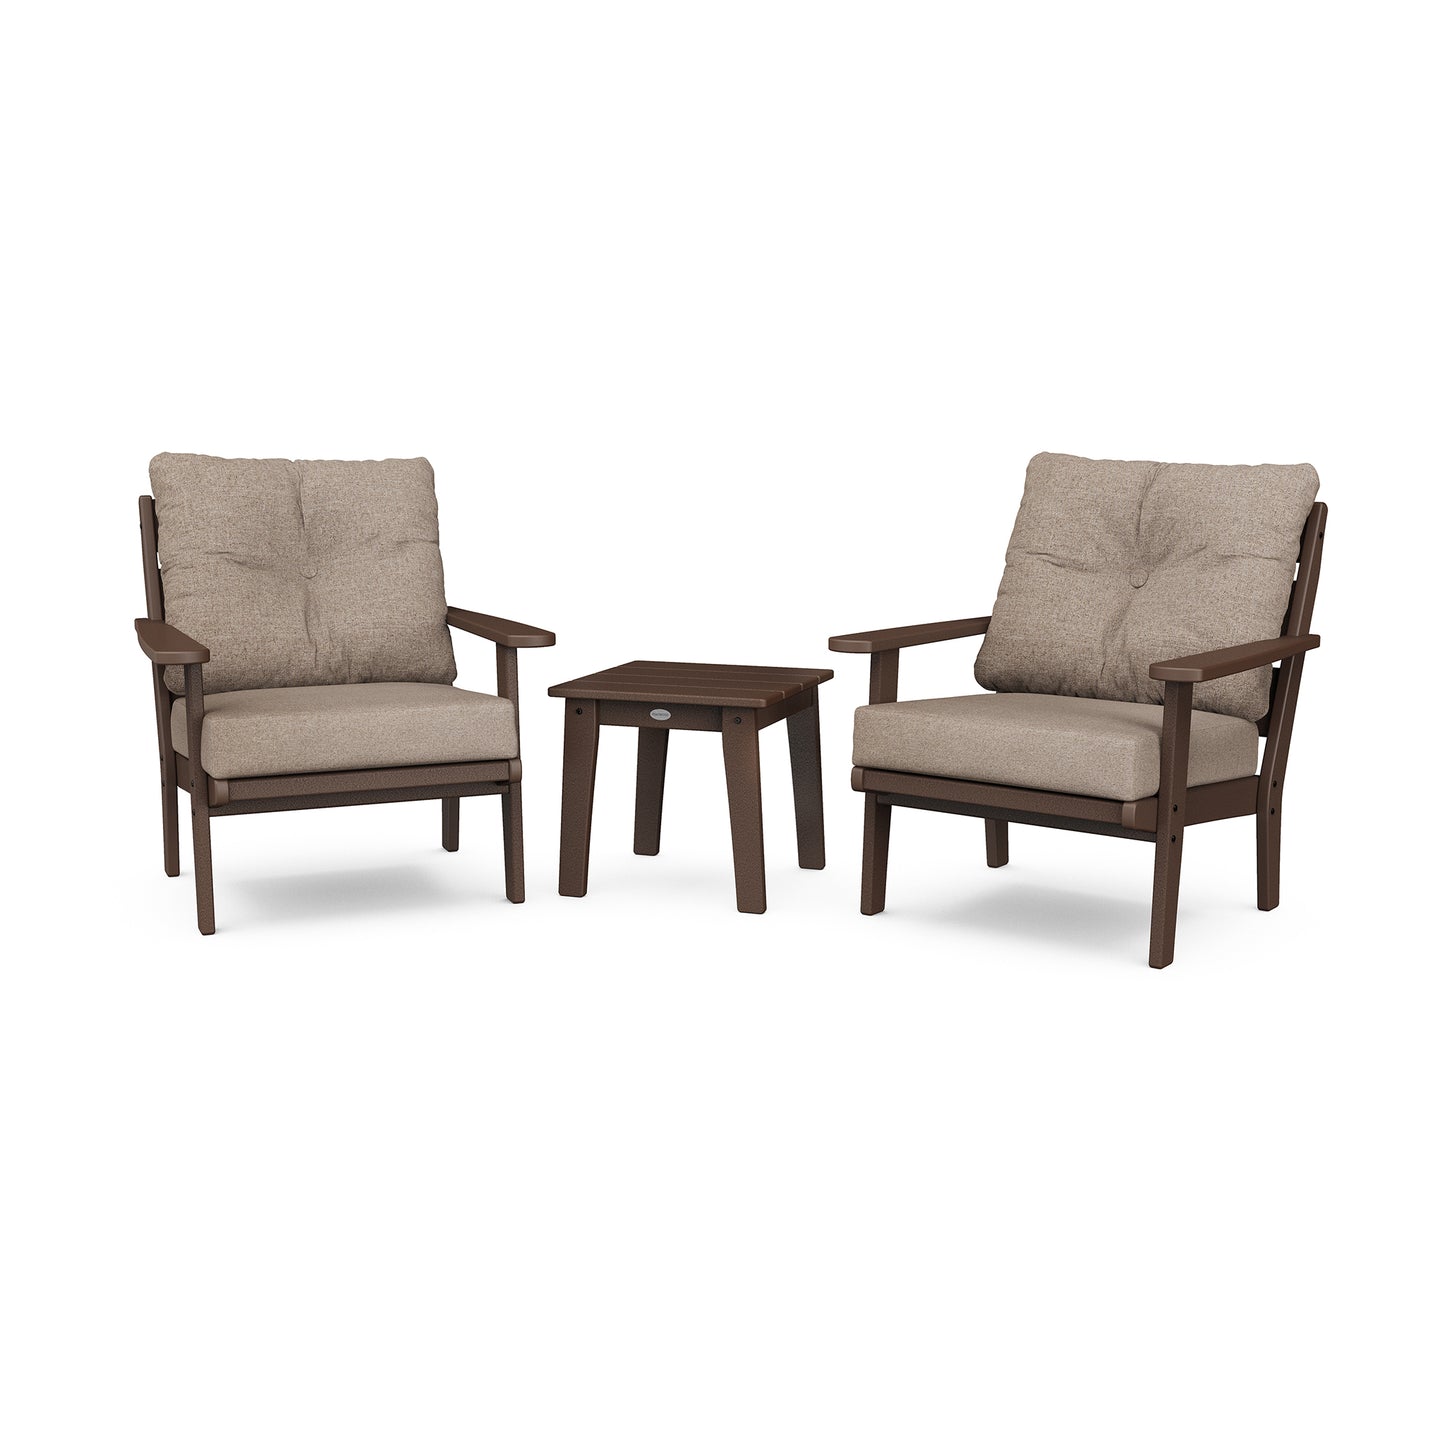 Two brown POLYWOOD Lakeside 3-Piece Deep Seating Chair Sets with beige cushions and a matching small square table set on a plain white background.